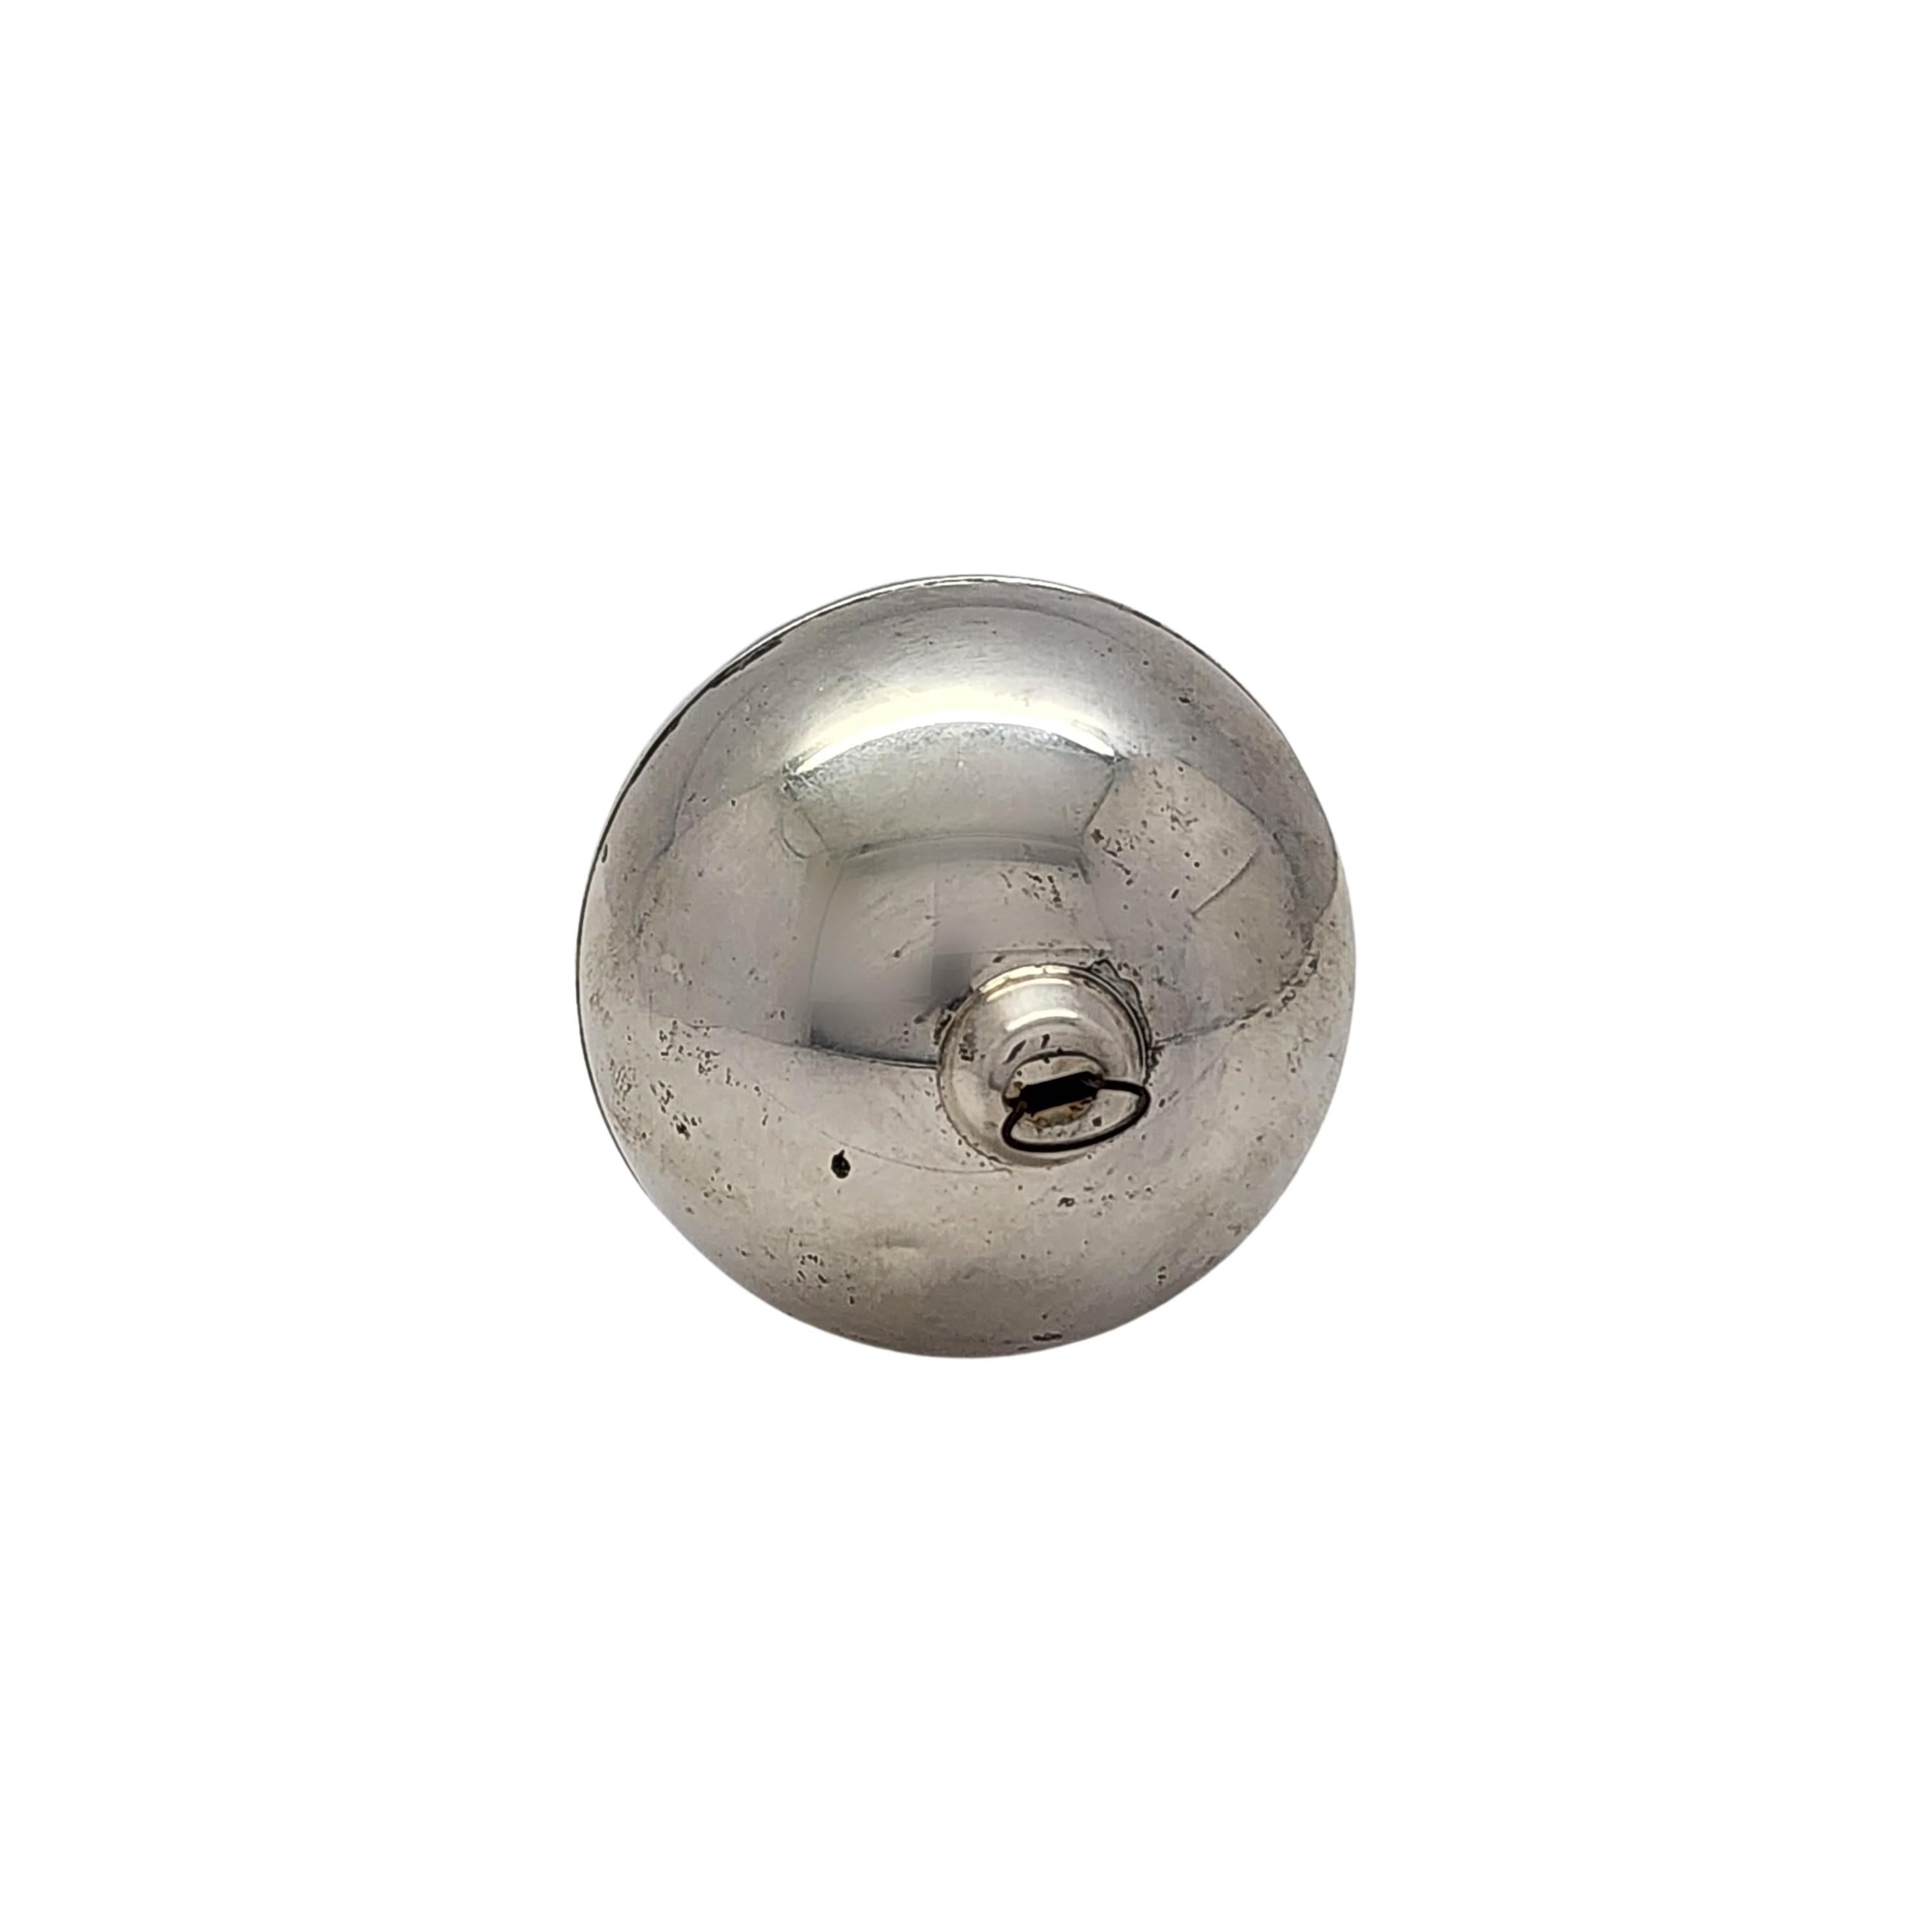 Towle Sterling Silver Ball Christmas Tree Ornament #15739 2